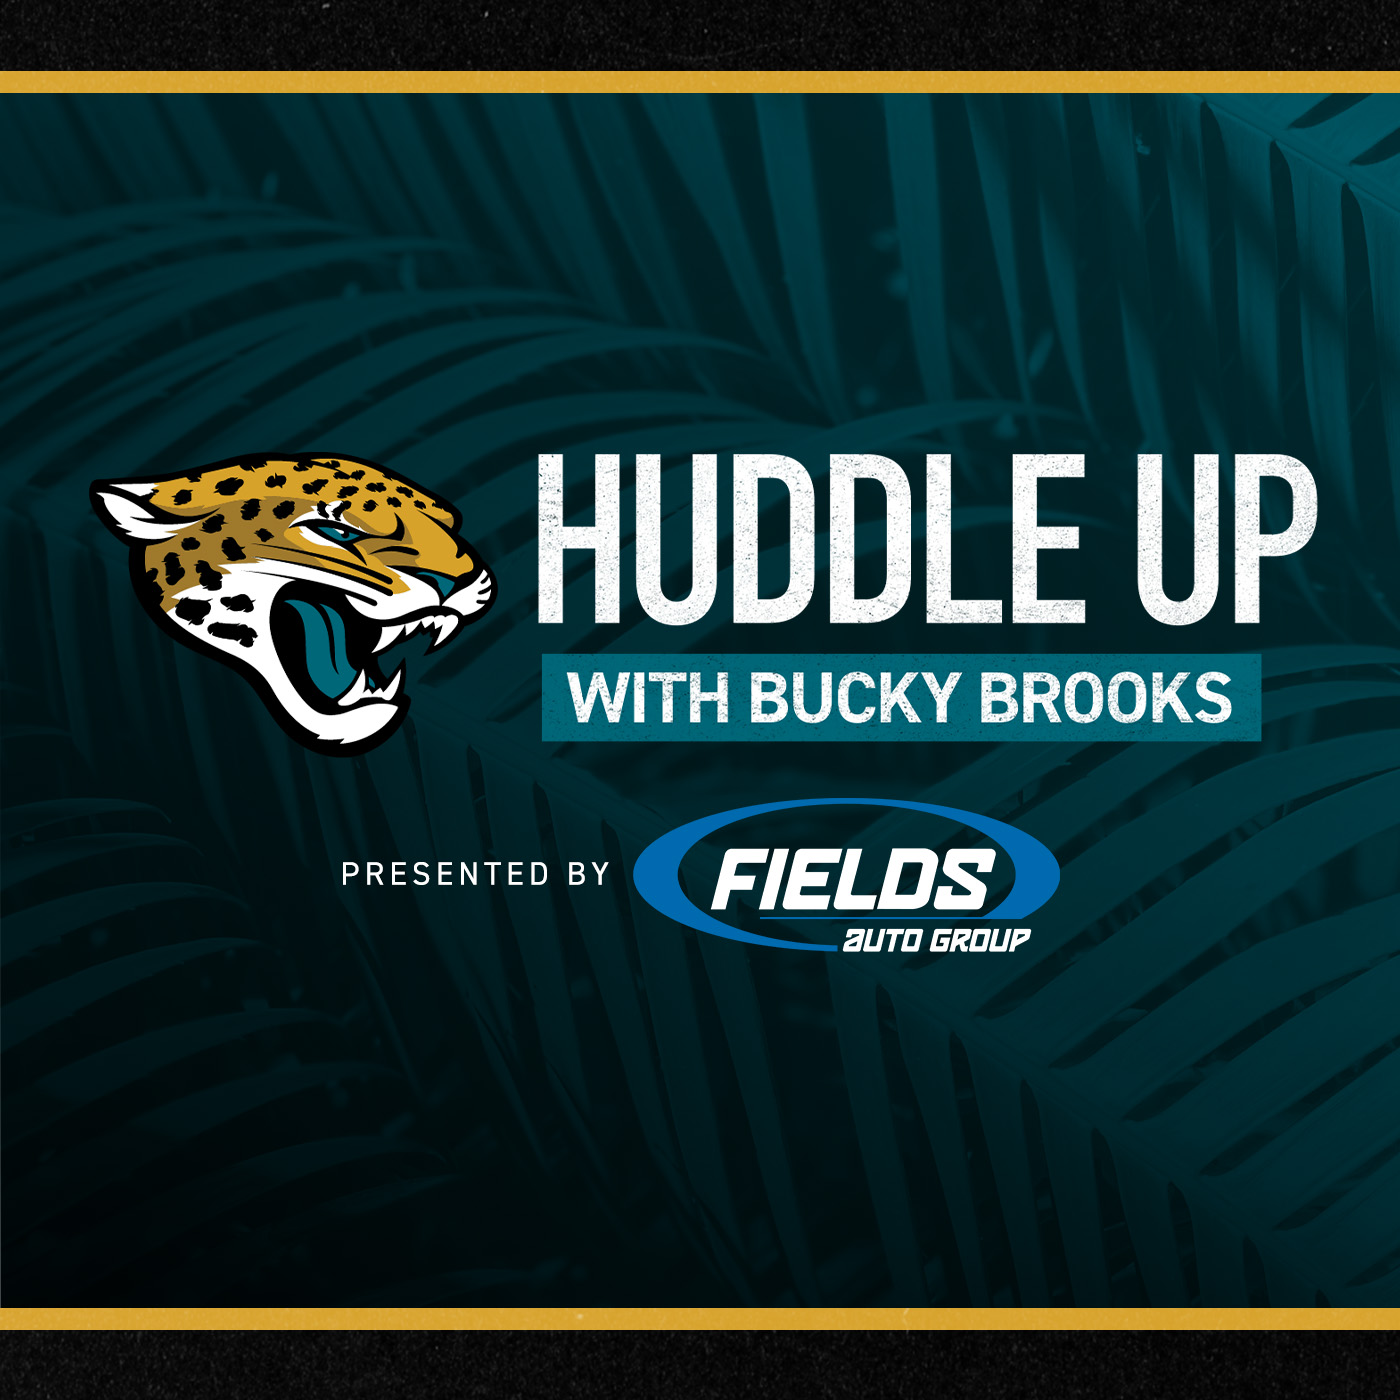 Keys to Chiefs Divisional Round matchup | Huddle Up: Wednesday, January 18